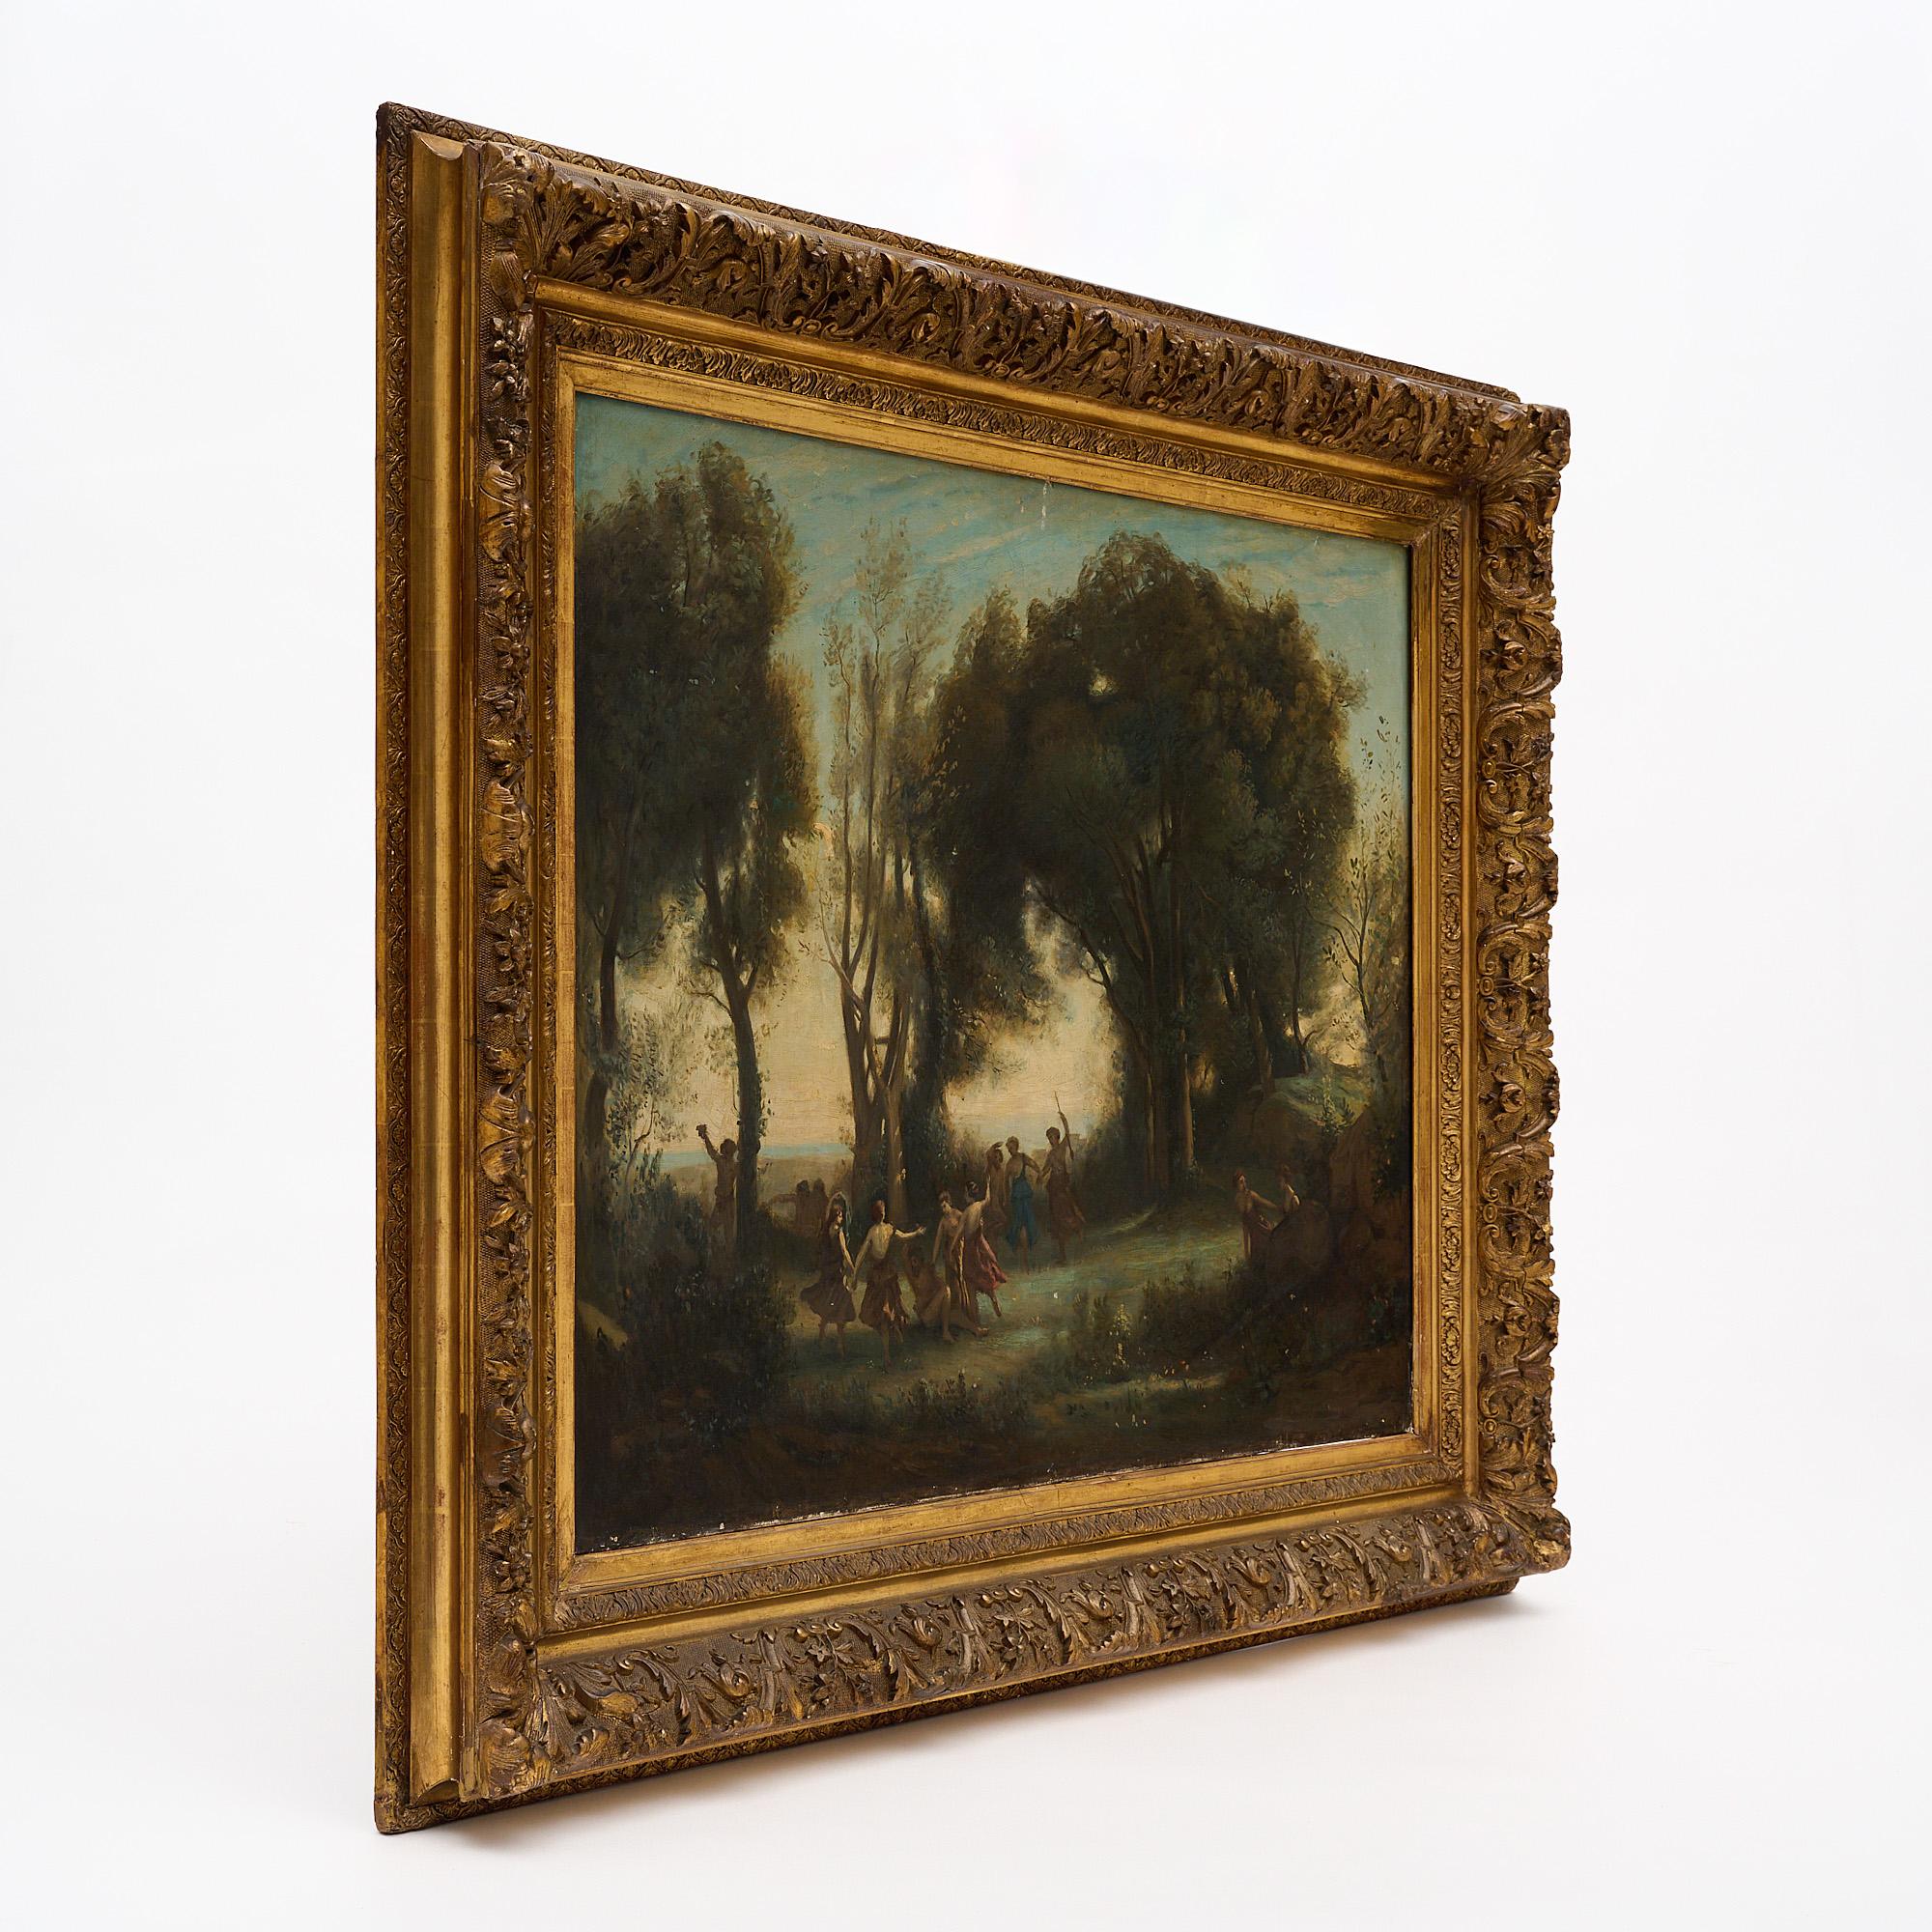 This 19th-century oil canvas; from Maison Blanchet; known for top-notch art supplies; is stamped with a 1890 mark. Blanchet; situated at rue Saint-Benoît 20; was an artist's haven offering premium colors; high-quality canvases; easels; and brushes.